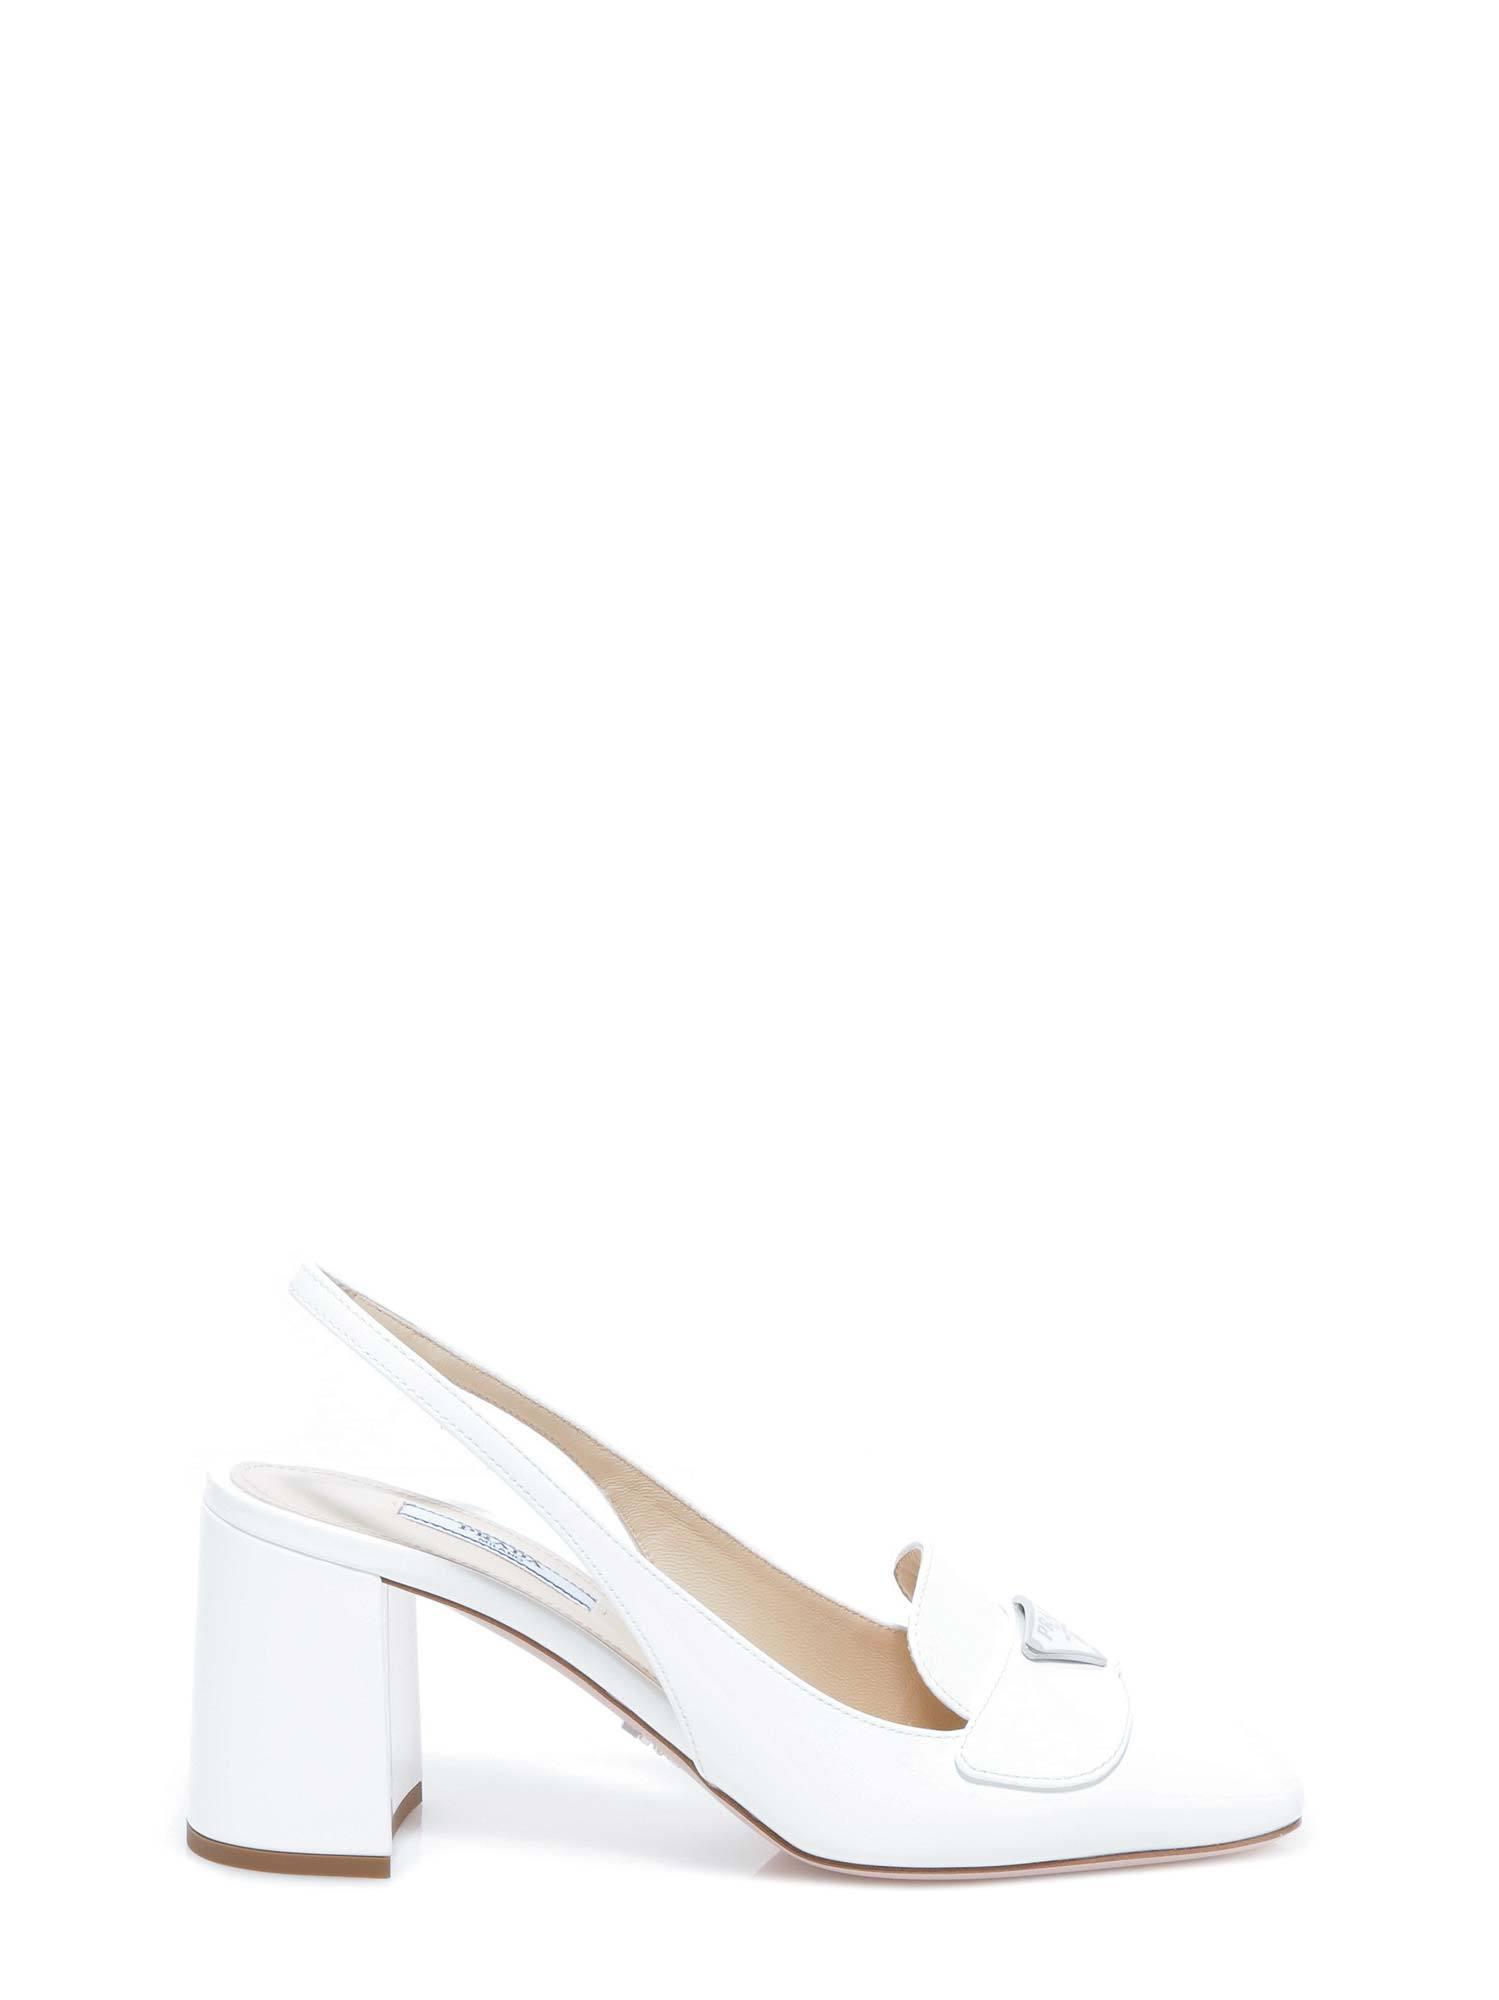 Prada Leather Logo Plaque Slingback Pumps in White - Save 41% - Lyst